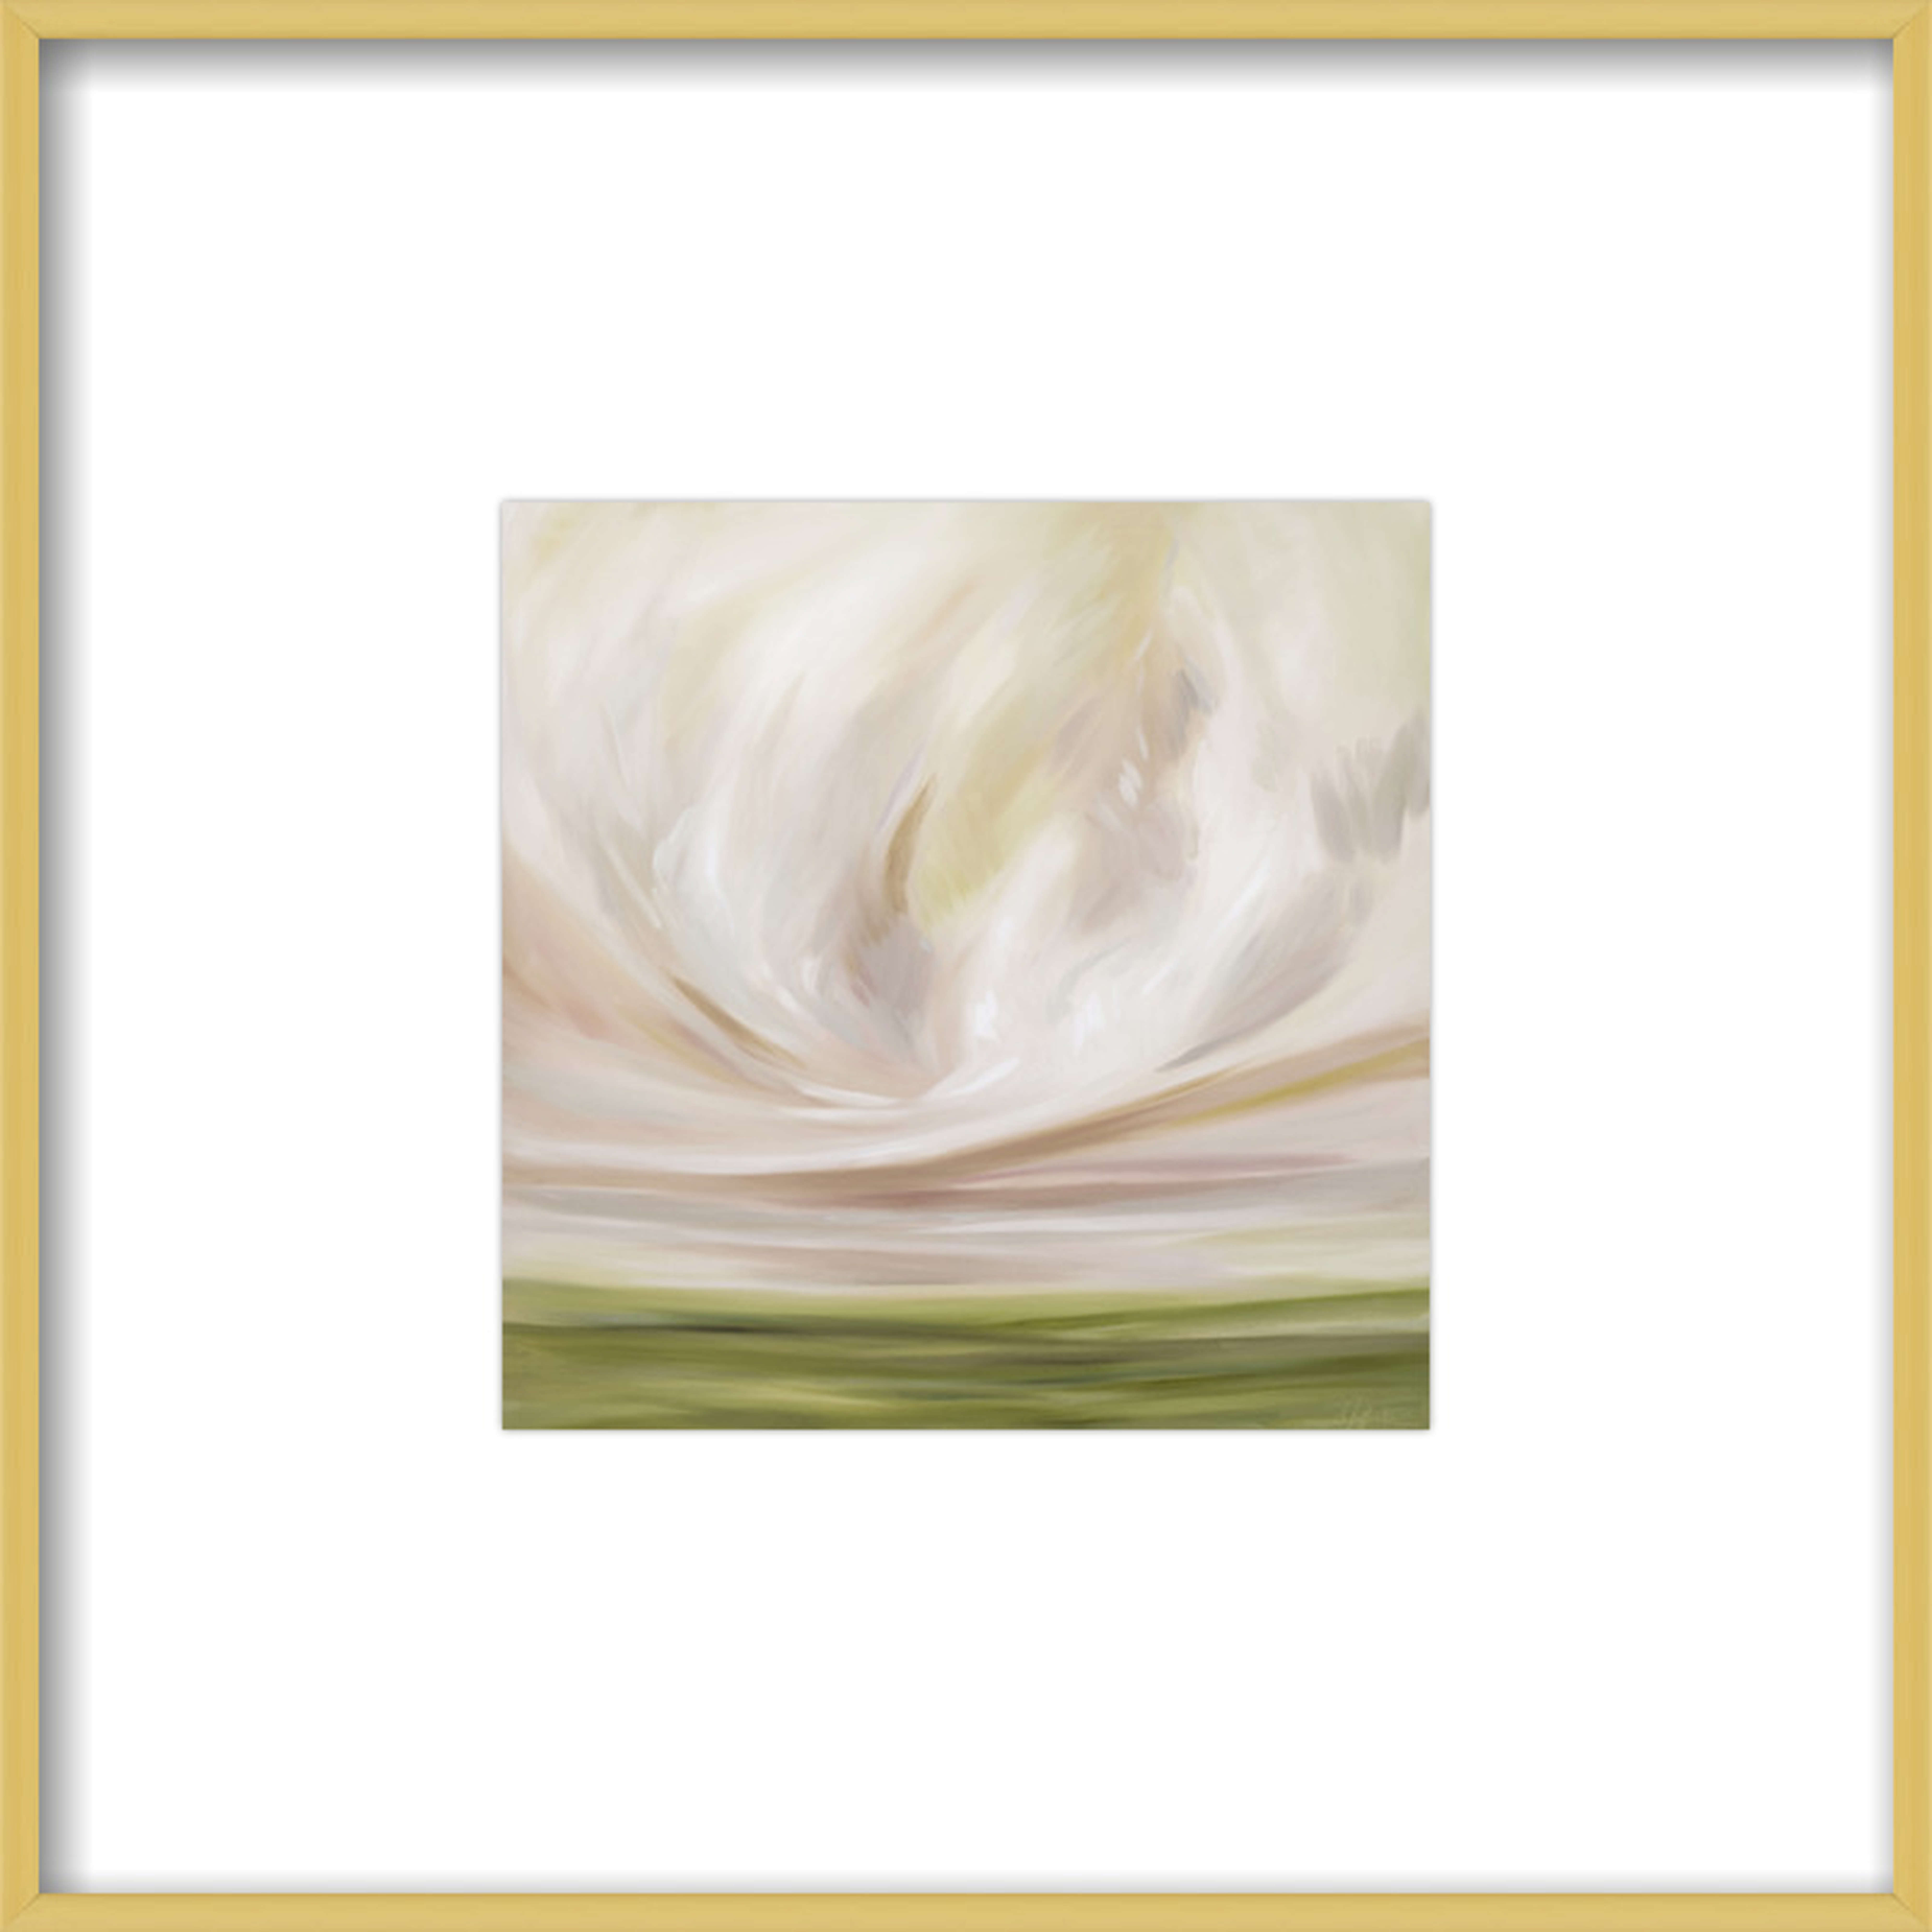 Peach Glory - 8"x8" Contemporary - Frosted Gold Metal - with matte - Artfully Walls